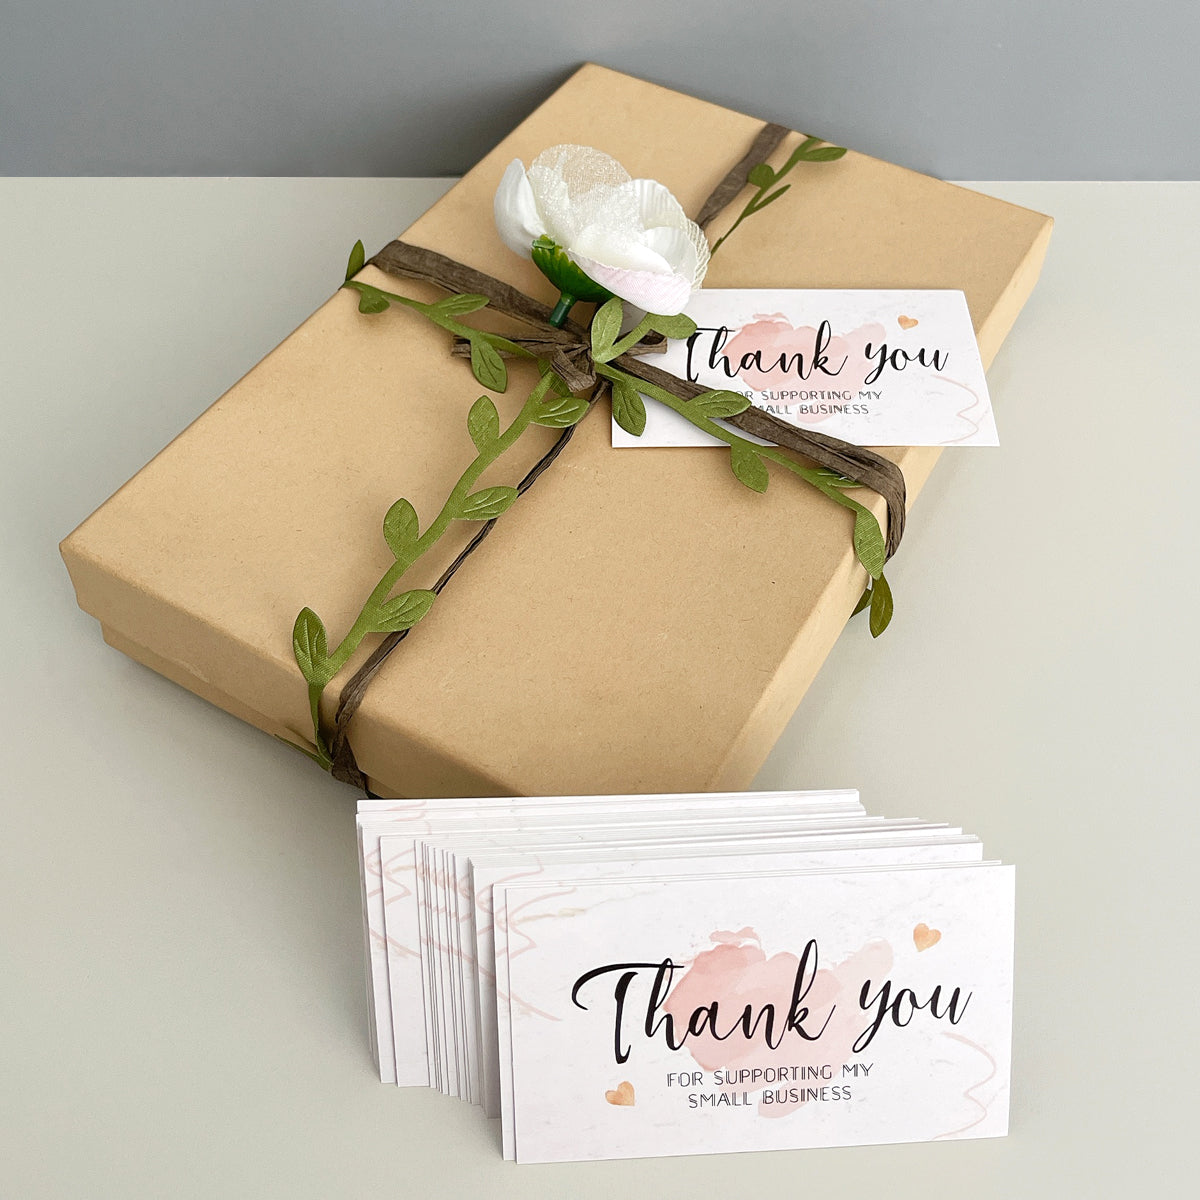 Wrapables 2.1" x 3.5" Thank You Card Inserts, Appreciation Cards for Small Business, Weddings, Bridal & Baby Showers, 120pcs